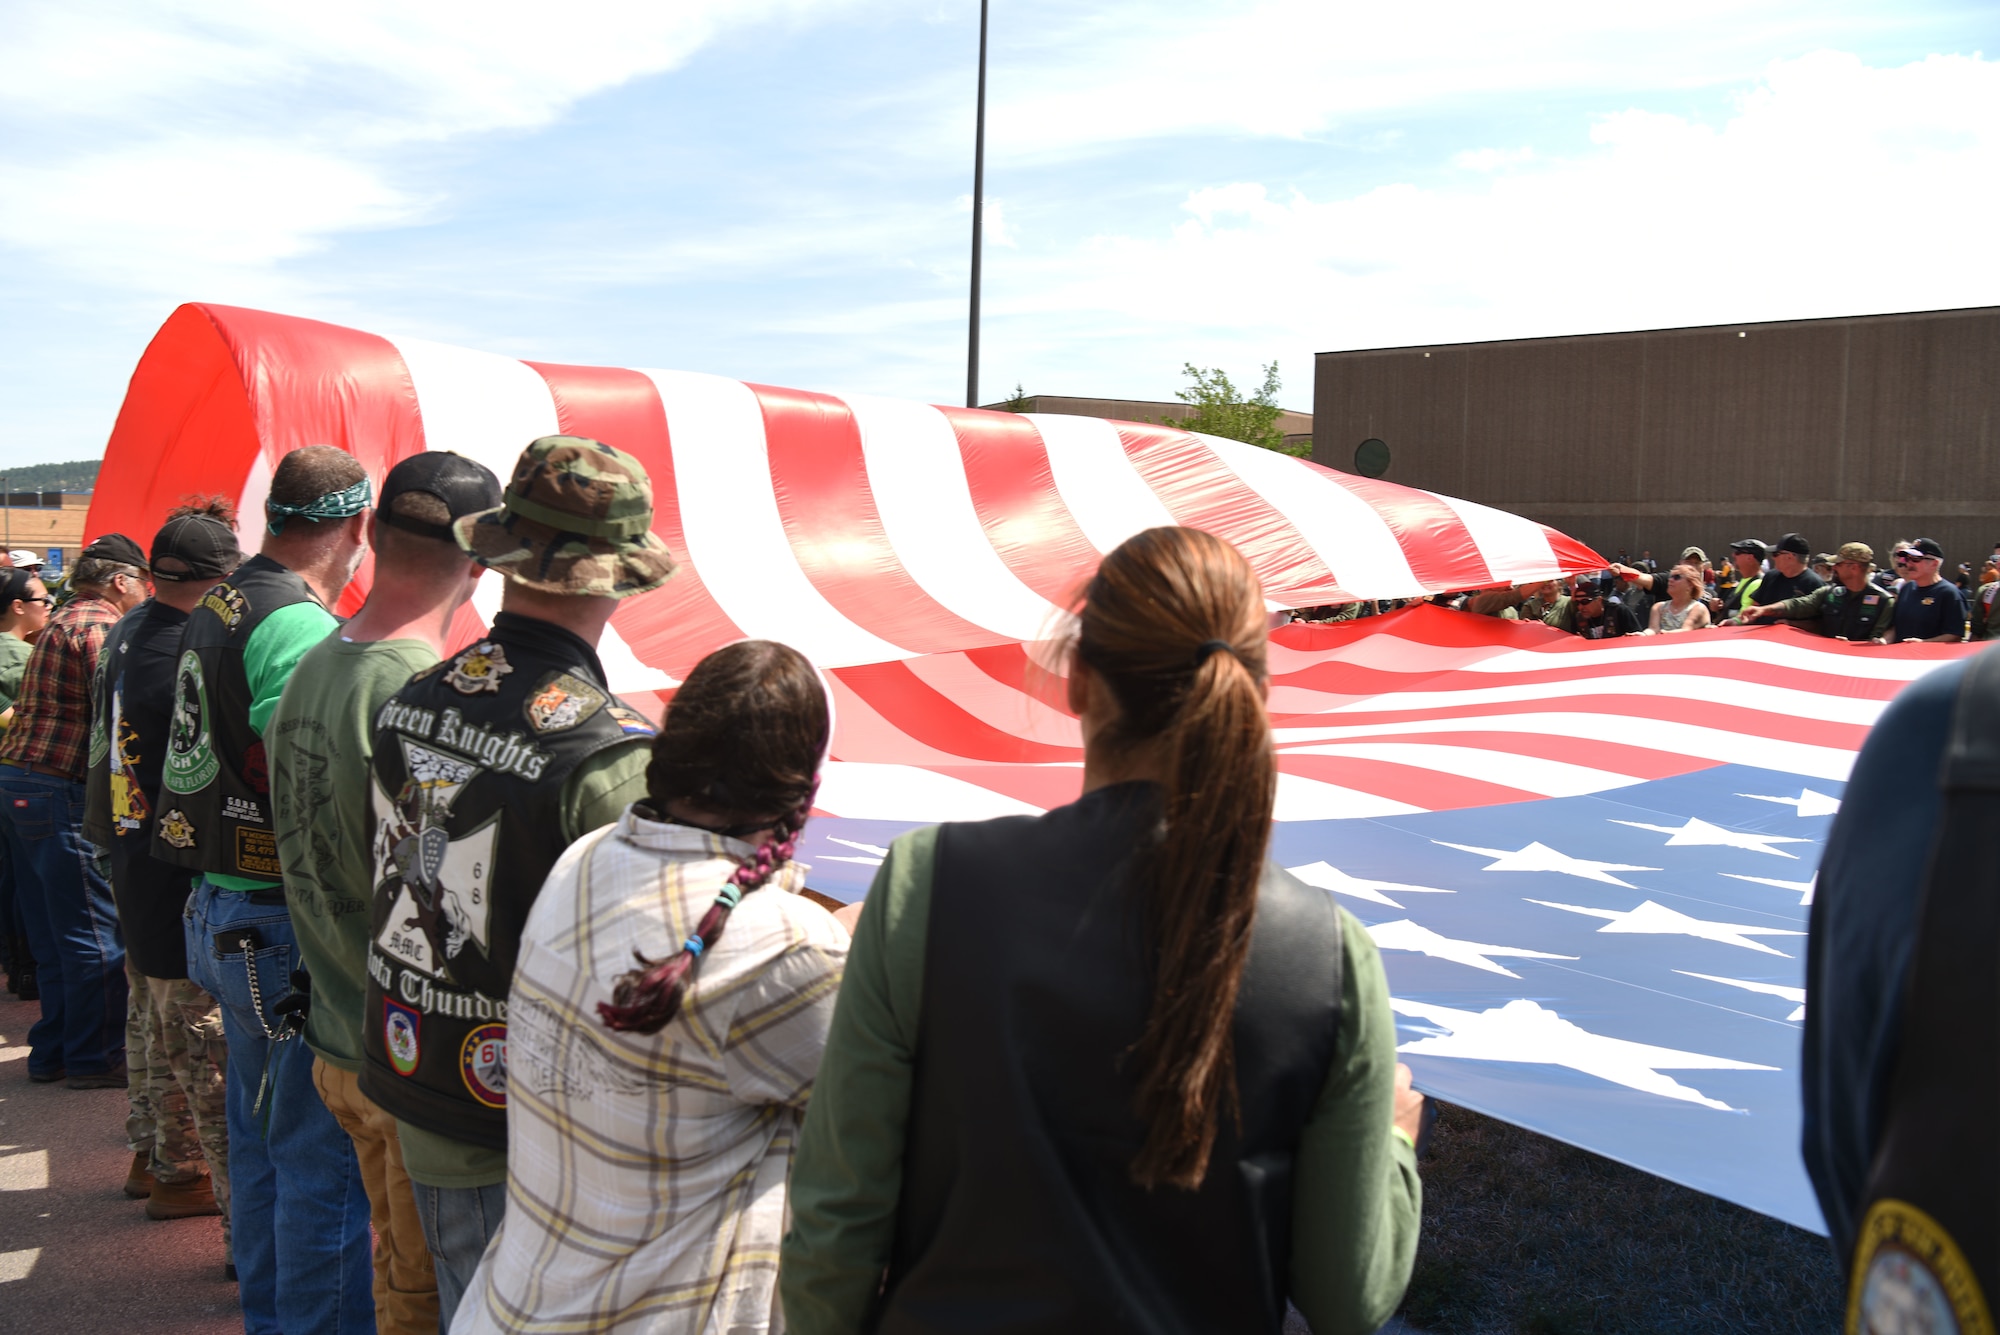 Participants from the Dakota Thunder Run fold a flag flown by retired Army 1st Sgt., Dana Bowman, a former Golden Knight parachute team member, as he parachuted to the ground at Sturgis, S.D., Aug. 7, 2018. Over 150 participants rode 53 miles from Ellsworth AFB to the Sturgis Motorcycle Rally, where they helped kick off Military Appreciation Day events. (U.S. Air Force photo by Airman 1st Class Thomas Karol)